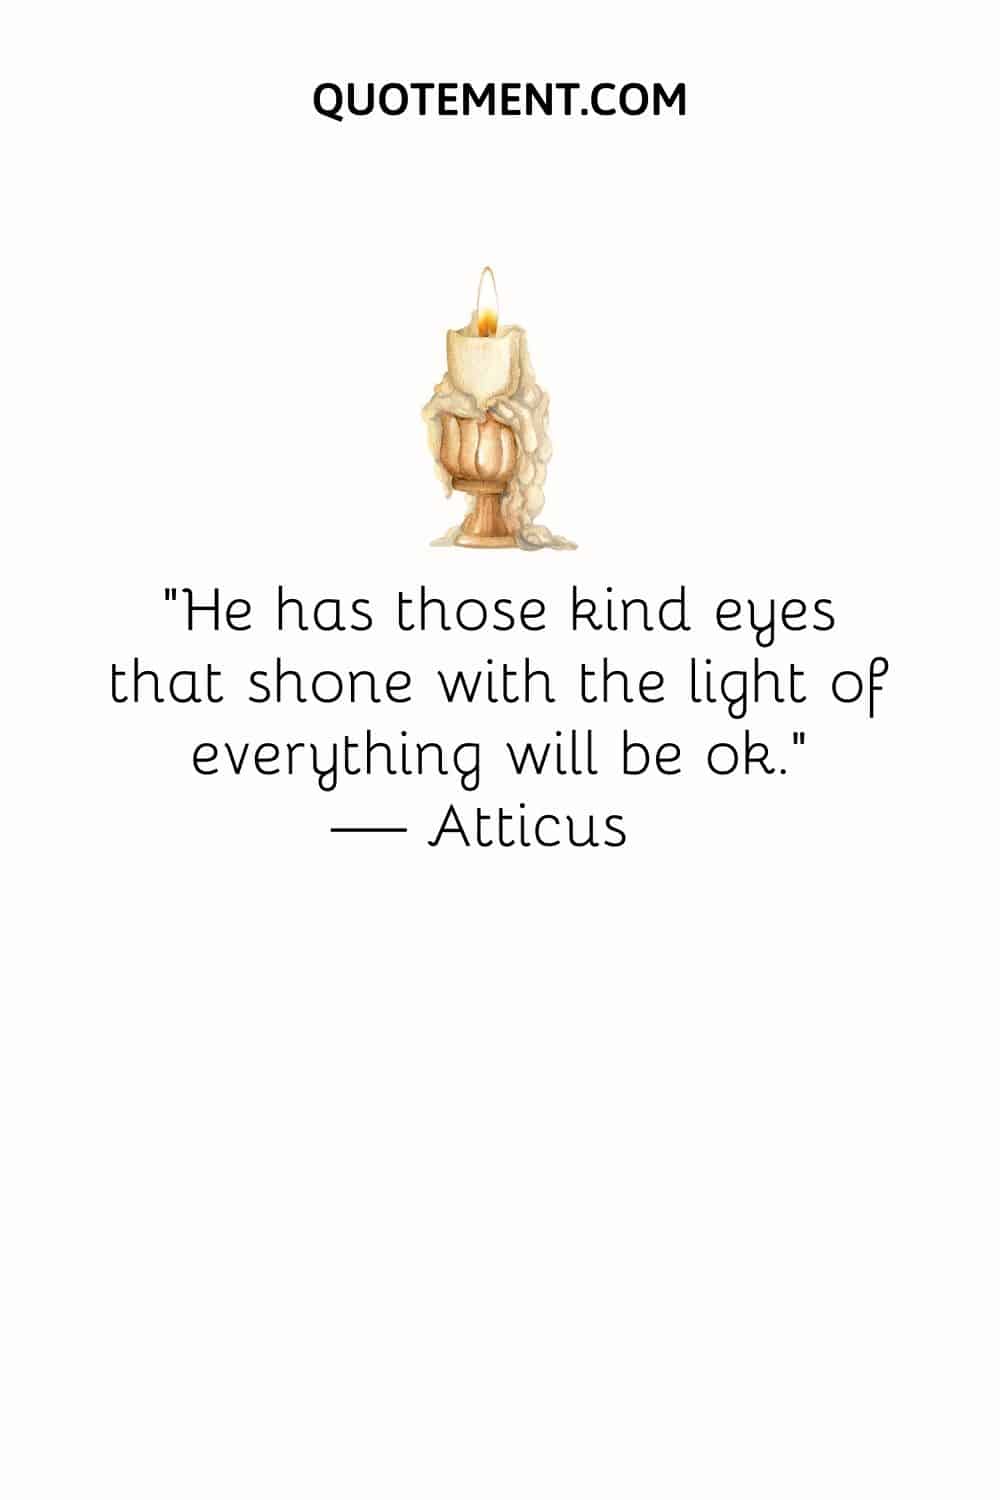 “He has those kind eyes that shone with the light of everything will be ok.” — Atticus